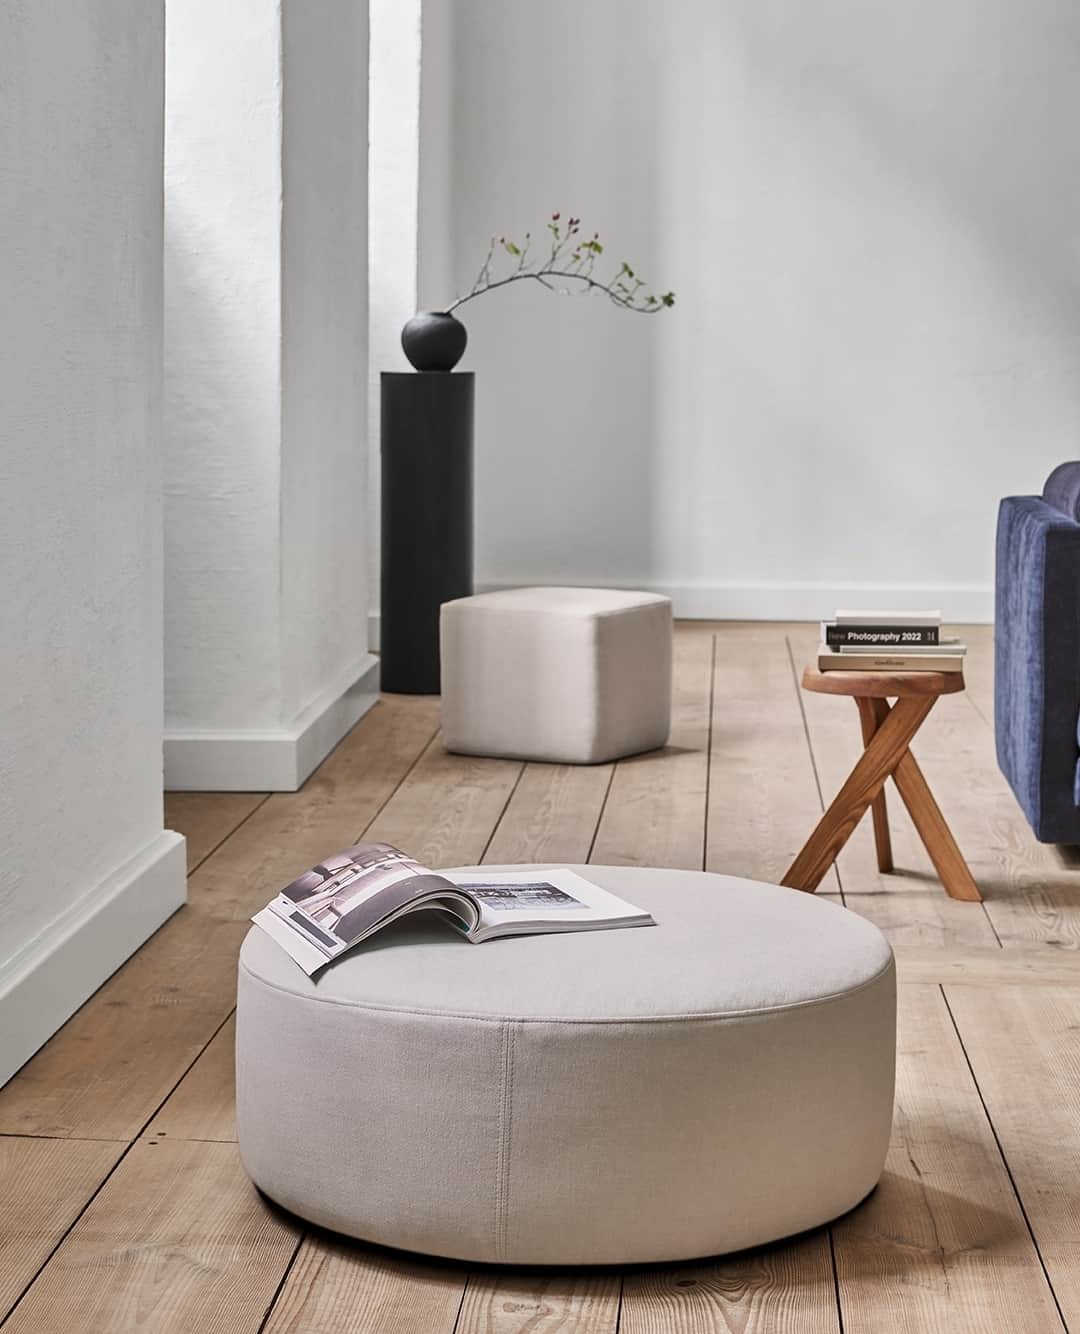 eilersenのインスタグラム：「A good pouffe or foot stool is perfect for extra guests,  an extra table or for books. ⁠ ⁠ Pouffe:  Wheel and  Bun⁠ ⁠ ⁠ ⁠ ⁠ #eilersen #eilersenfurniture #myeilersen #enjoyaneilersen  #jensjuuleilersen  #homedecor #sofa #danishdesign #inredning #finahem #interiorlovers #interiordesign #modernliving #minimalism #nordiskehjem #nordicinspiration #nordicliving #craftsmanship #boligindretning #designinterior #livingroominspo #boliginspiration  #hemindredning #schönerwohnen #nordicminimalism #designinspiration #throughgenerations」